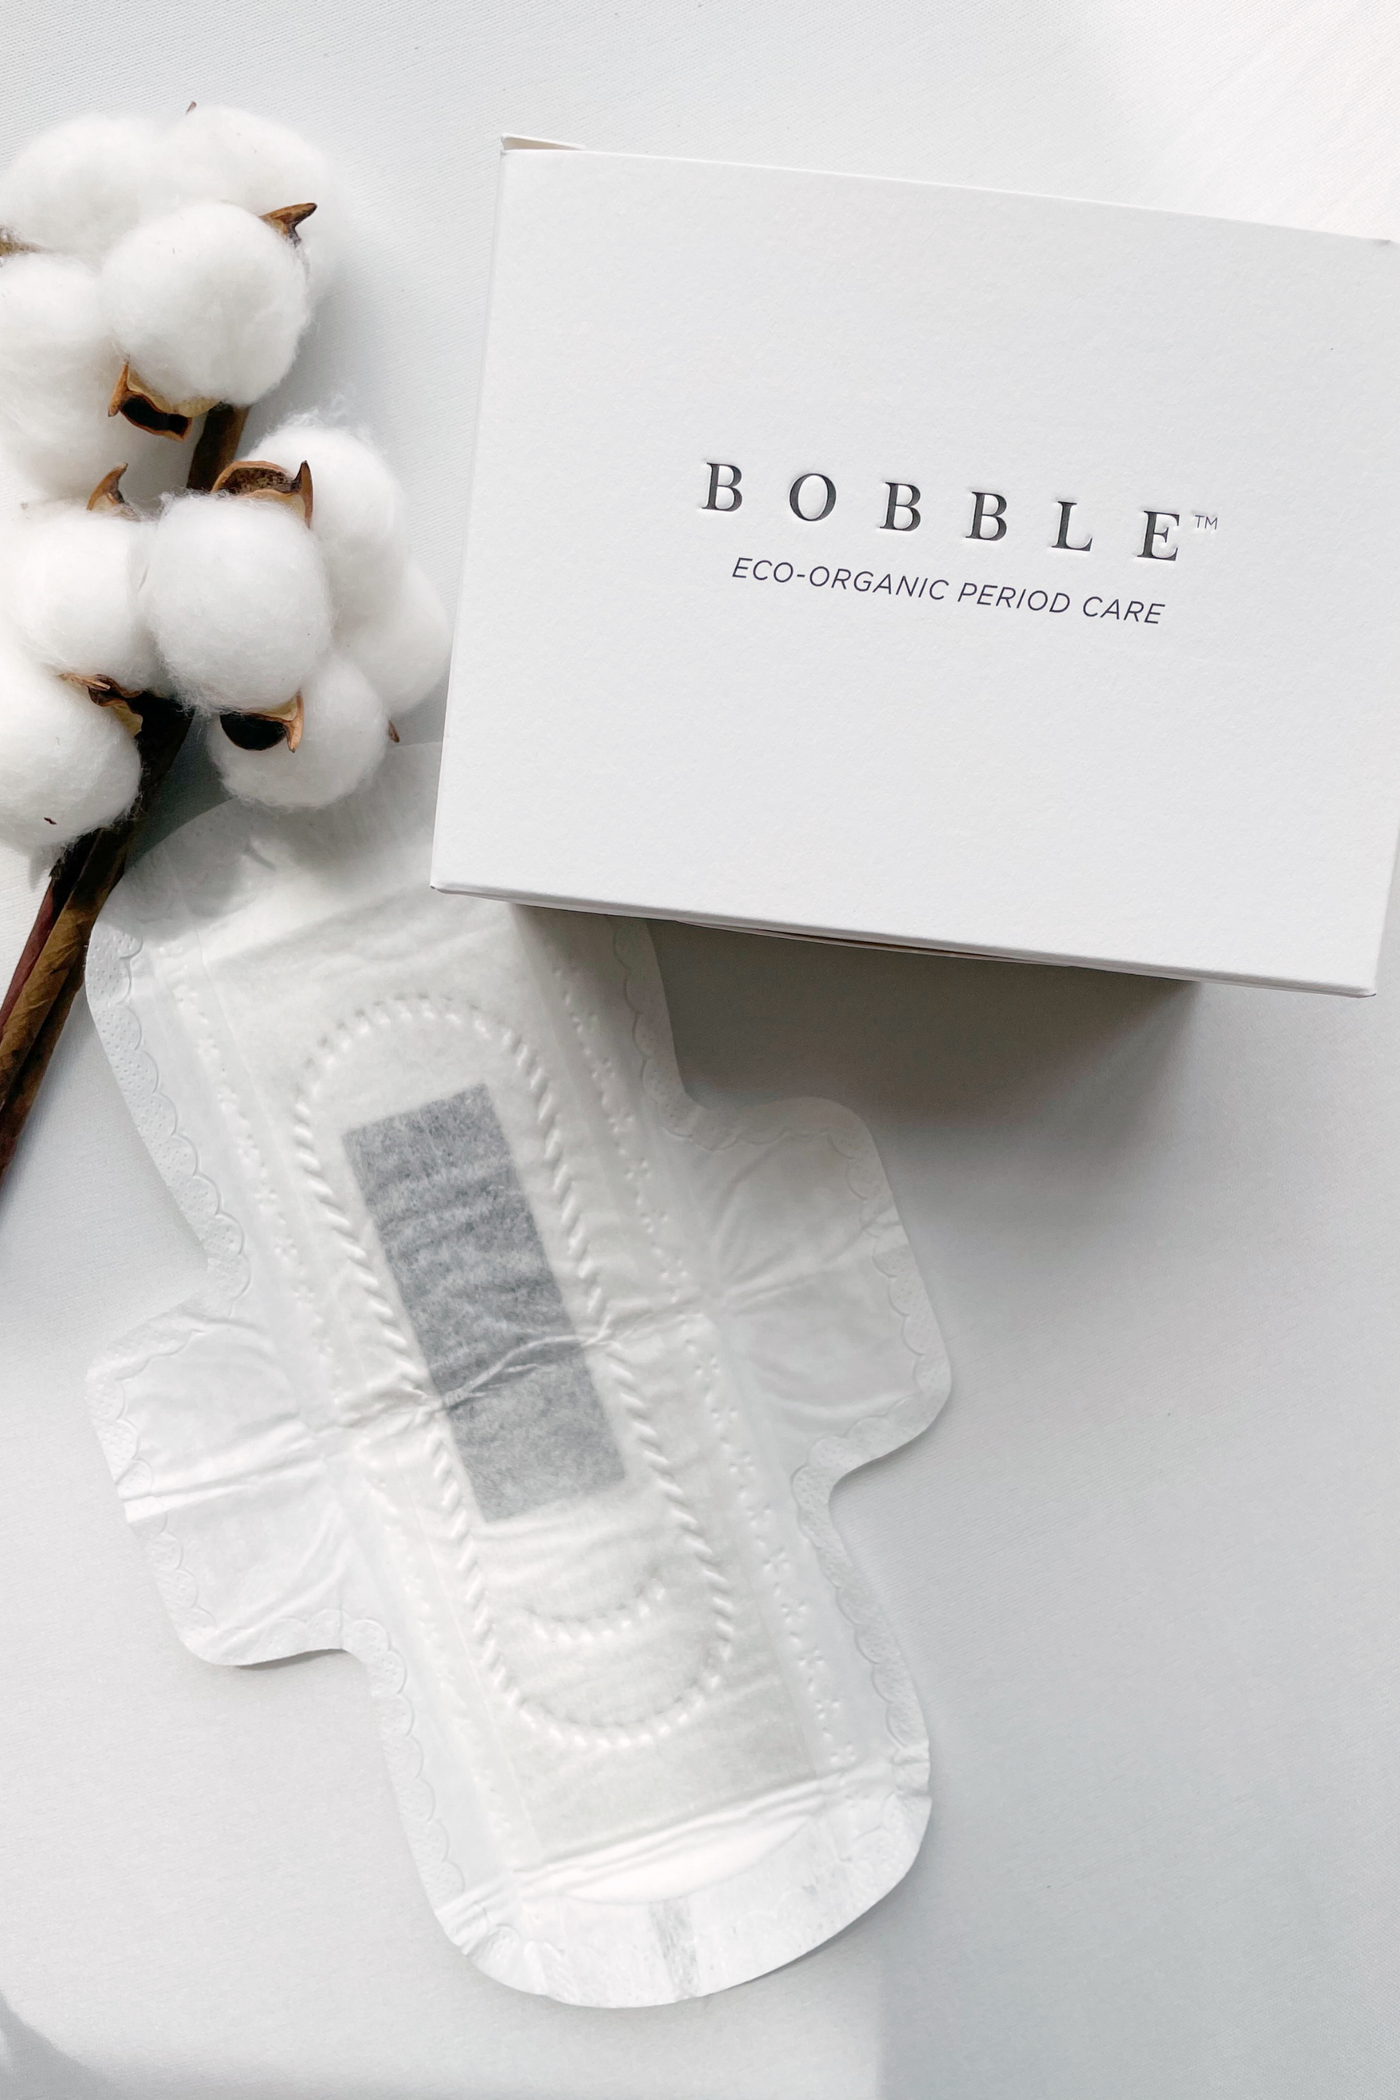 Bobble Day Pads, available on ZERRIN with free Singapore shipping above $50